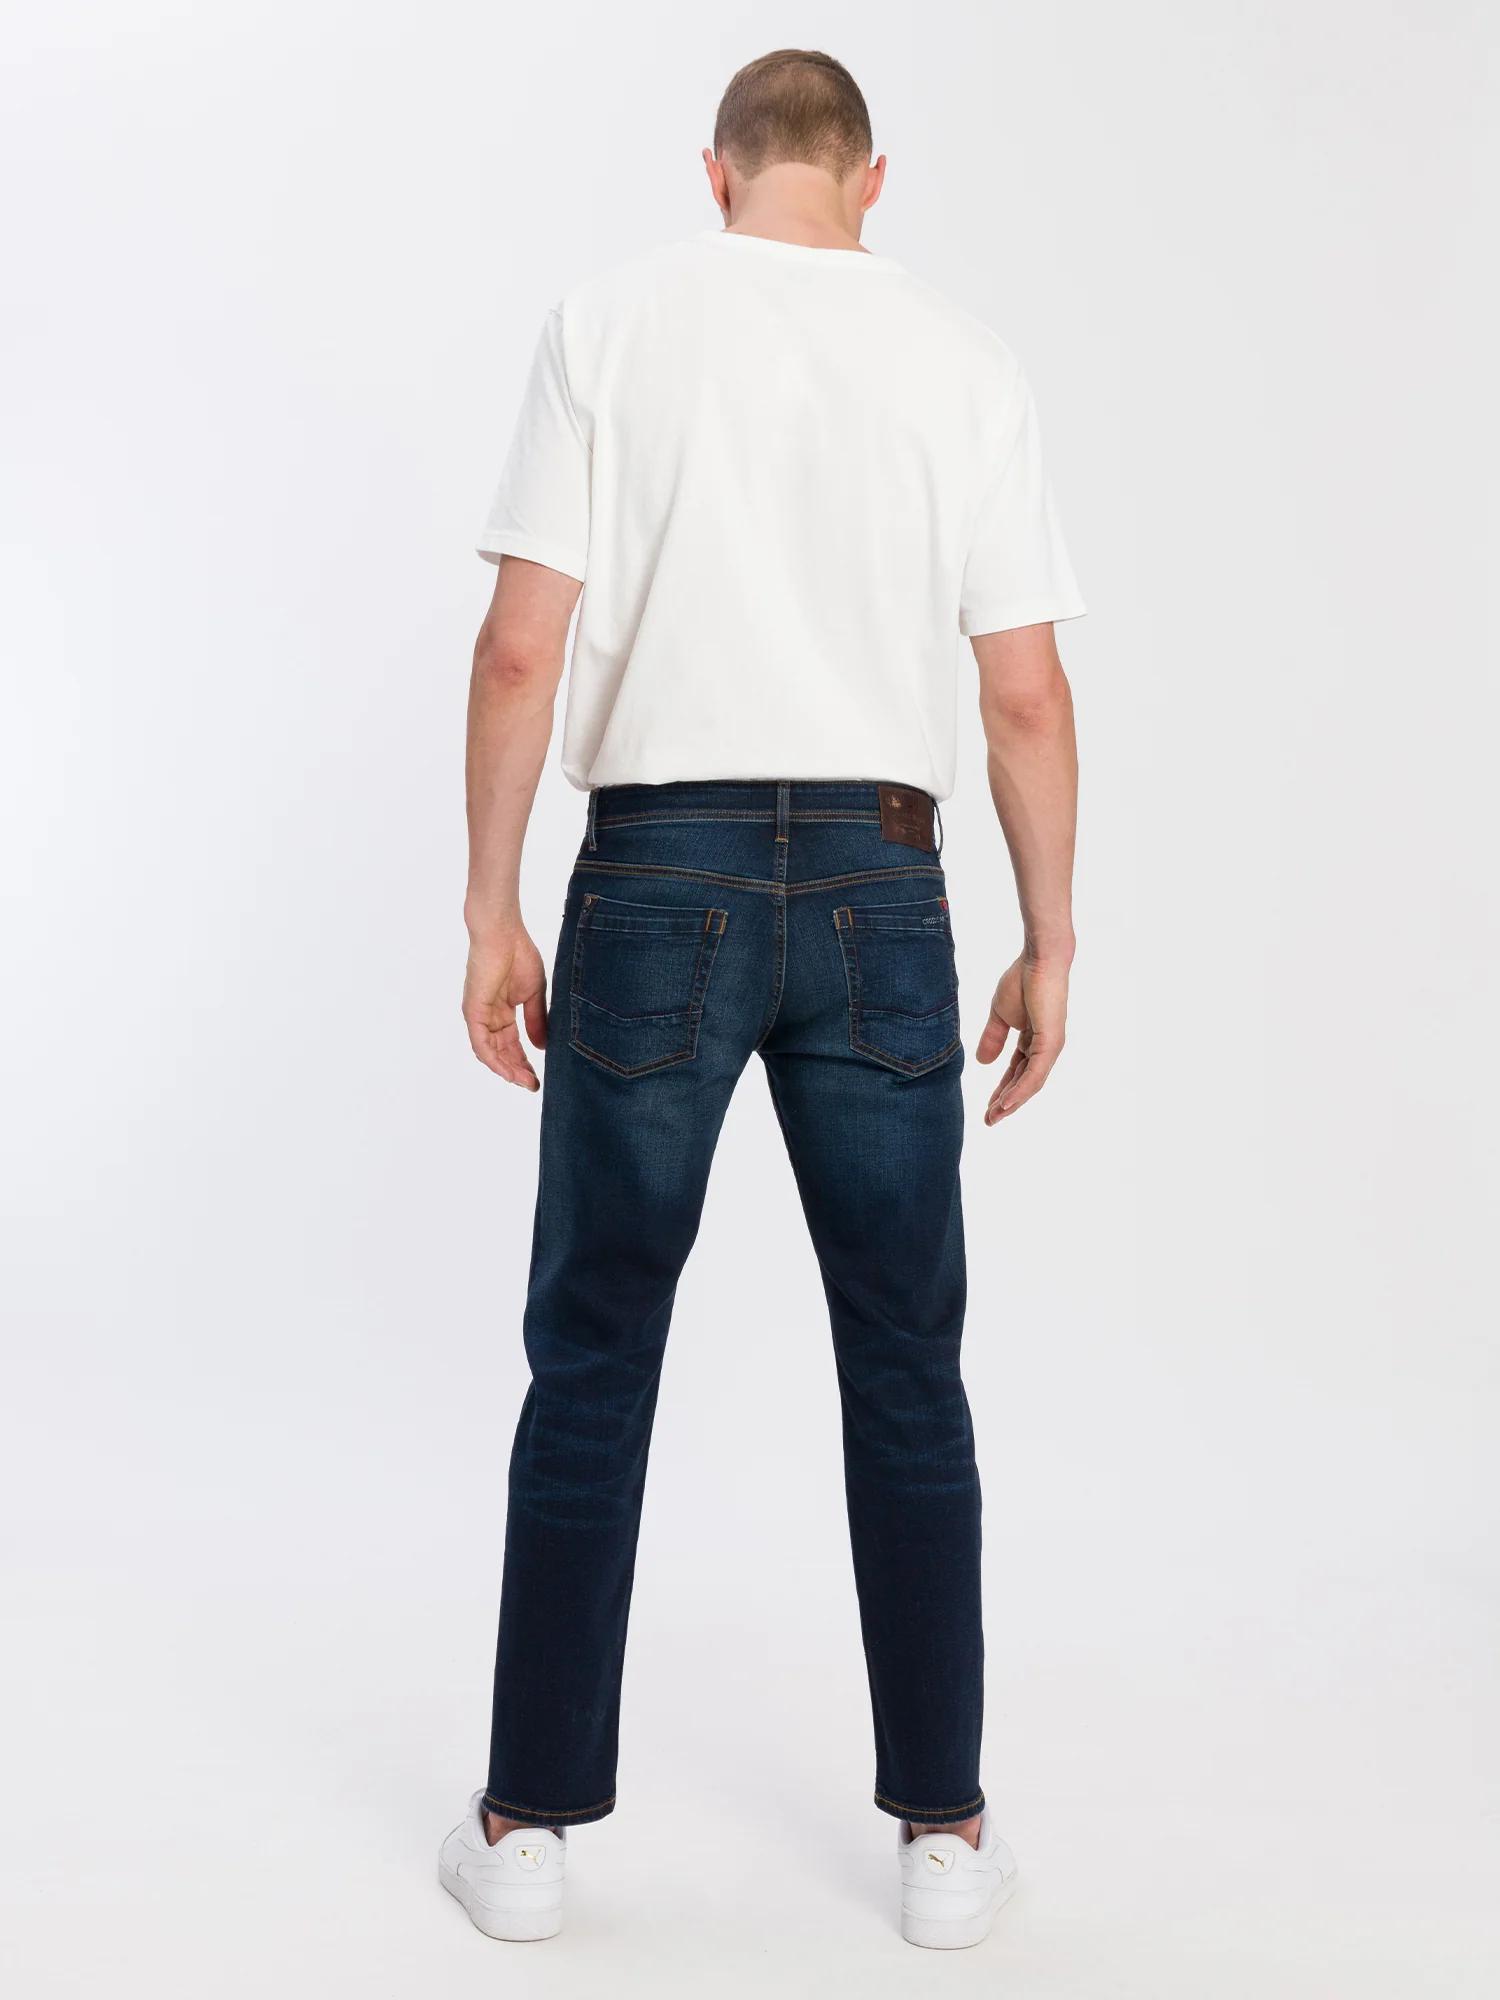 Cross Jeans Antonio Relaxed Fit deep blue